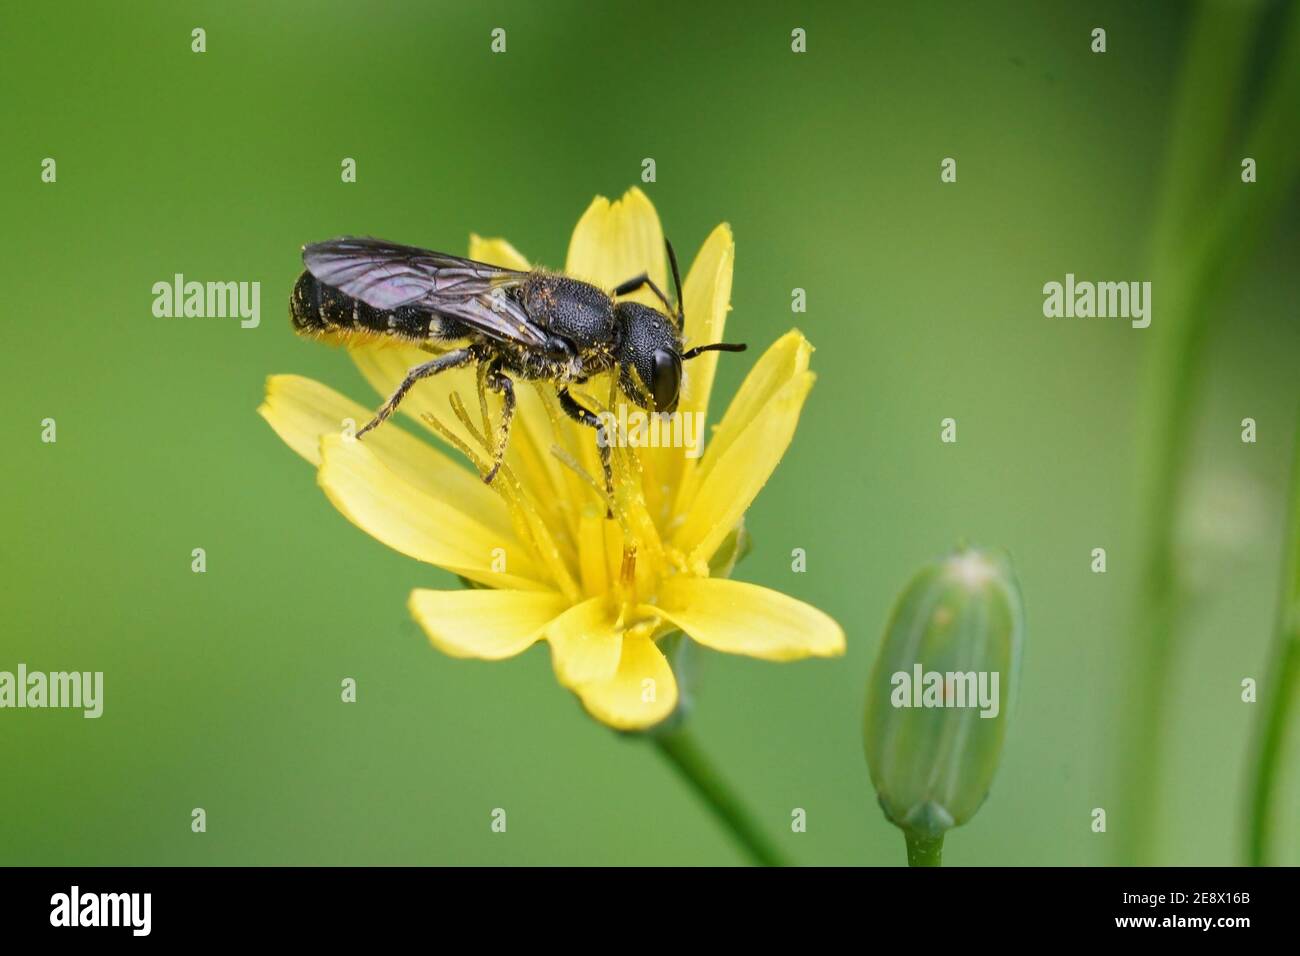 A female Large-headed Resin Bee, Heriades truncorum on a yellow Stock Photo